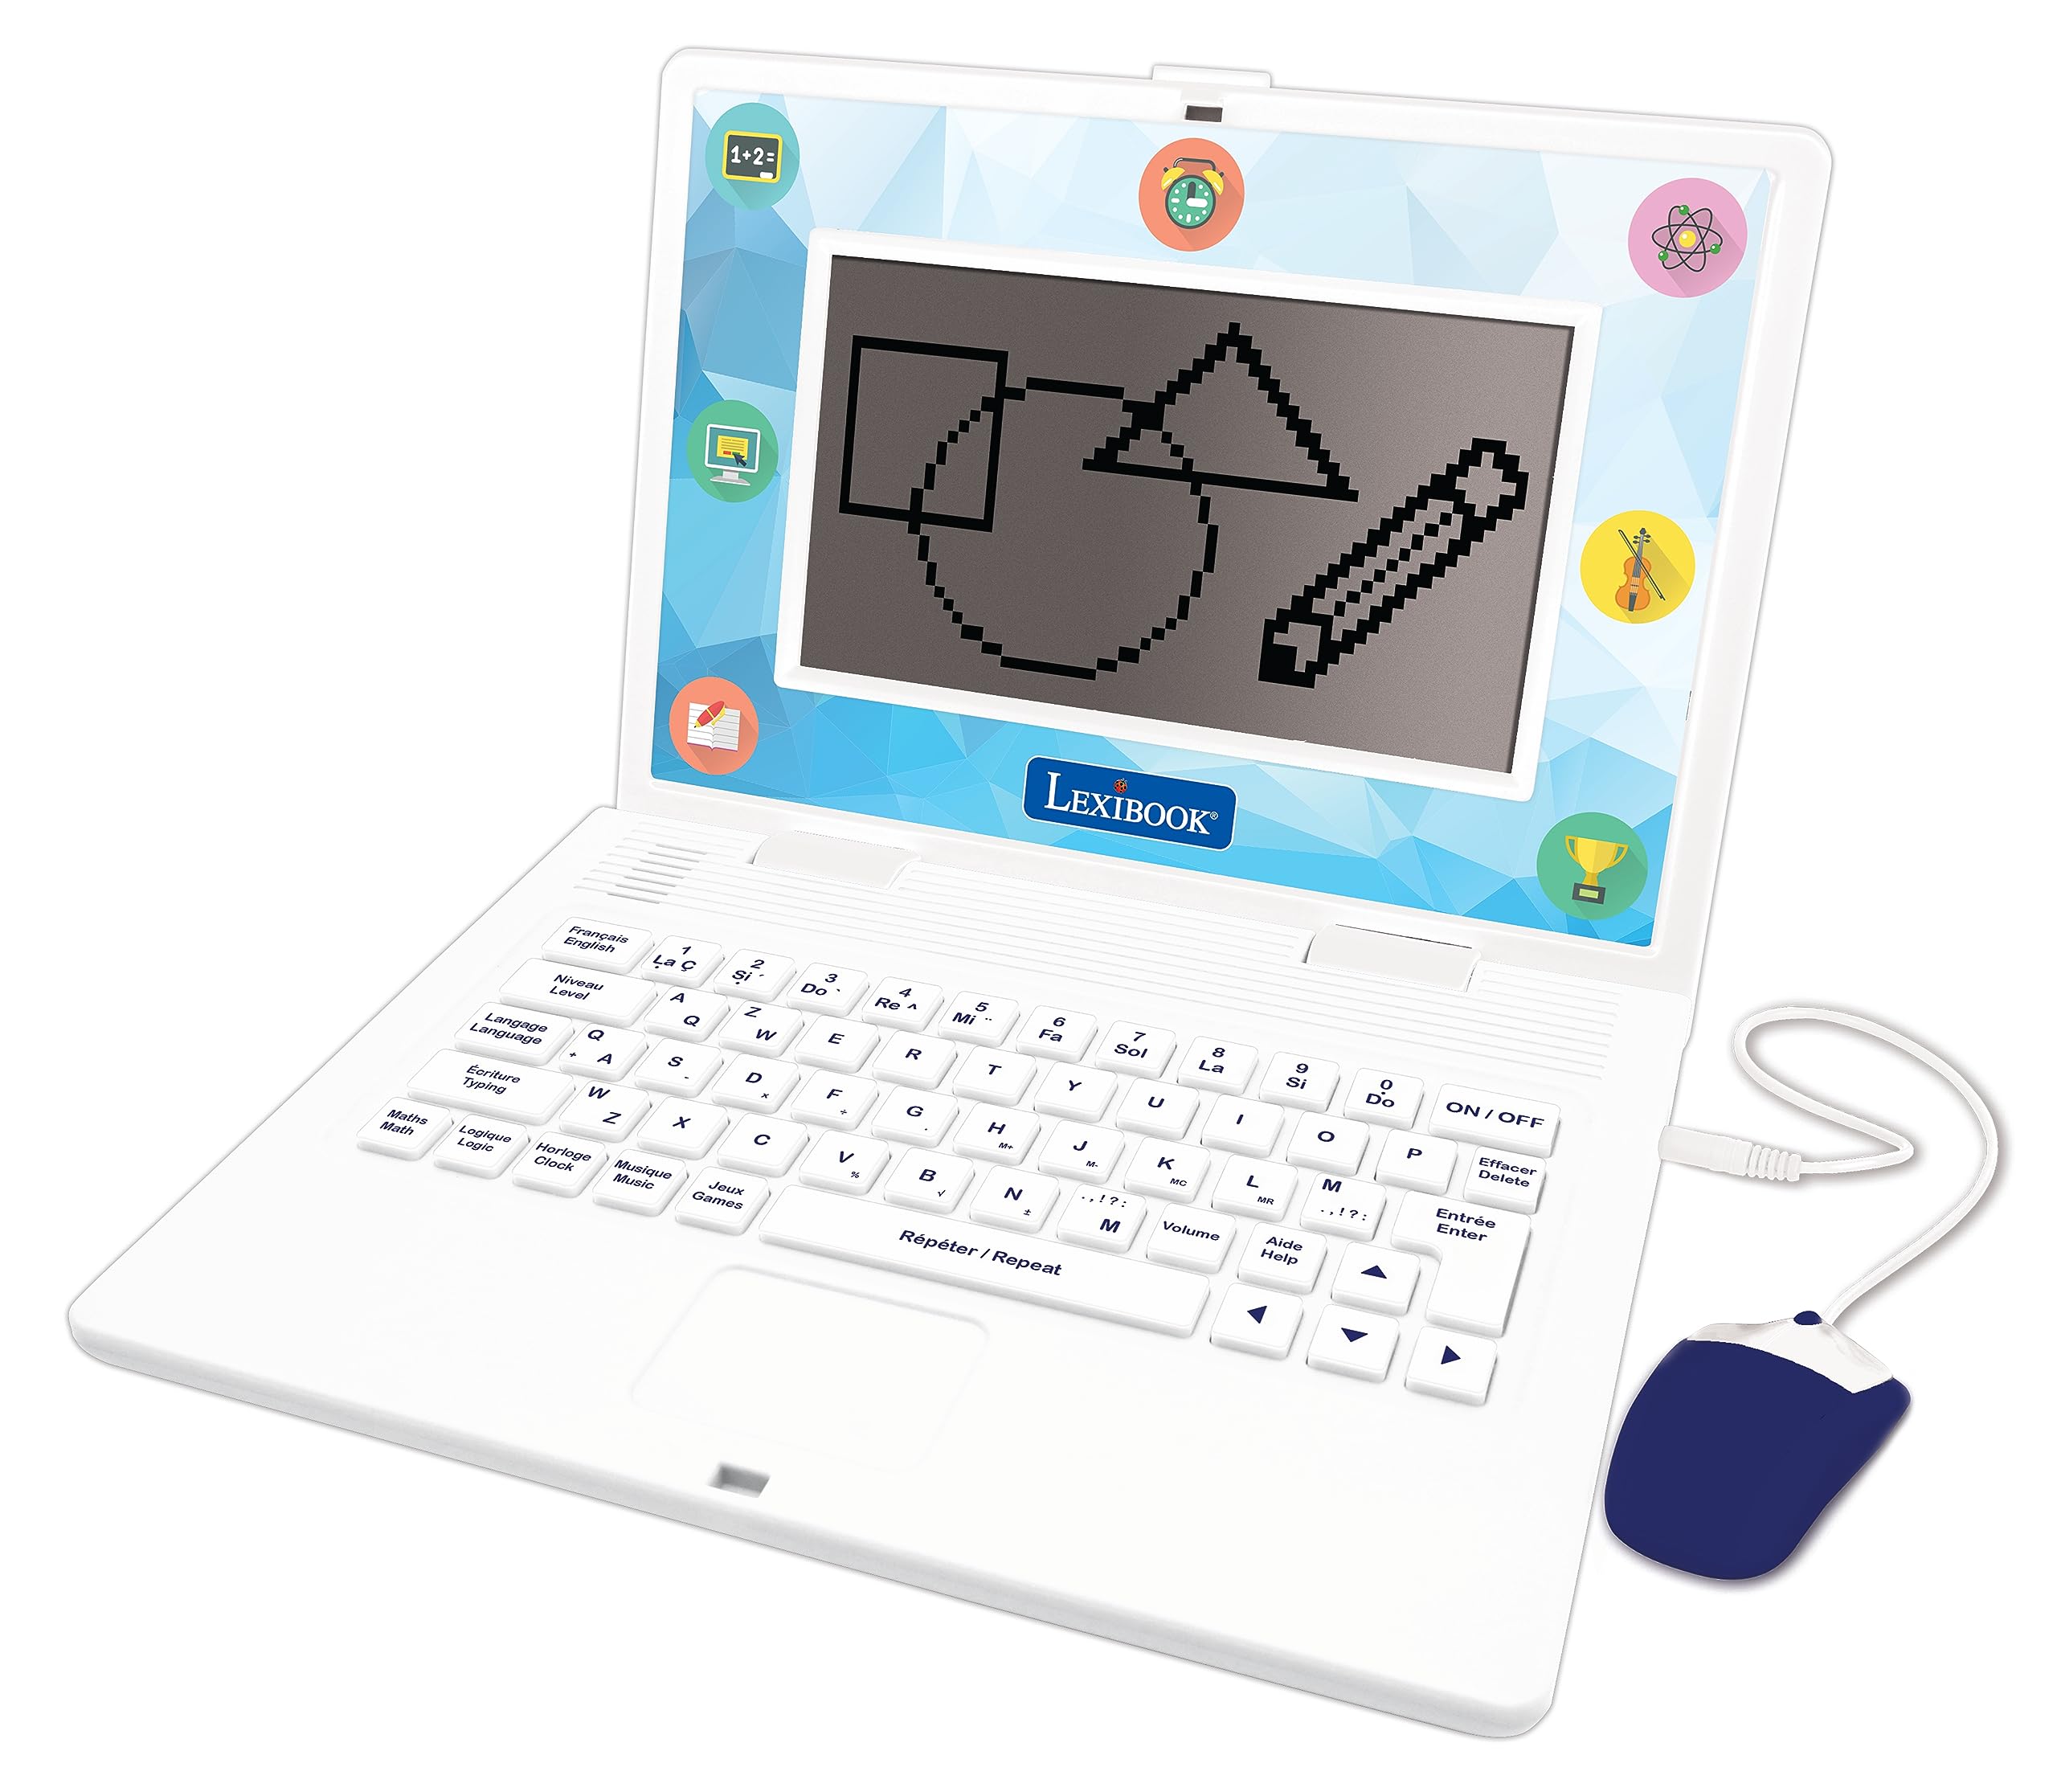 Lexibook - Bilingual and Educational Laptop English/Spanish - Toy for Children, 170 Activities to Learn Languages, Mathematics, Logic, Clock Reading, Play Games and Music, Large Screen - JC599i2